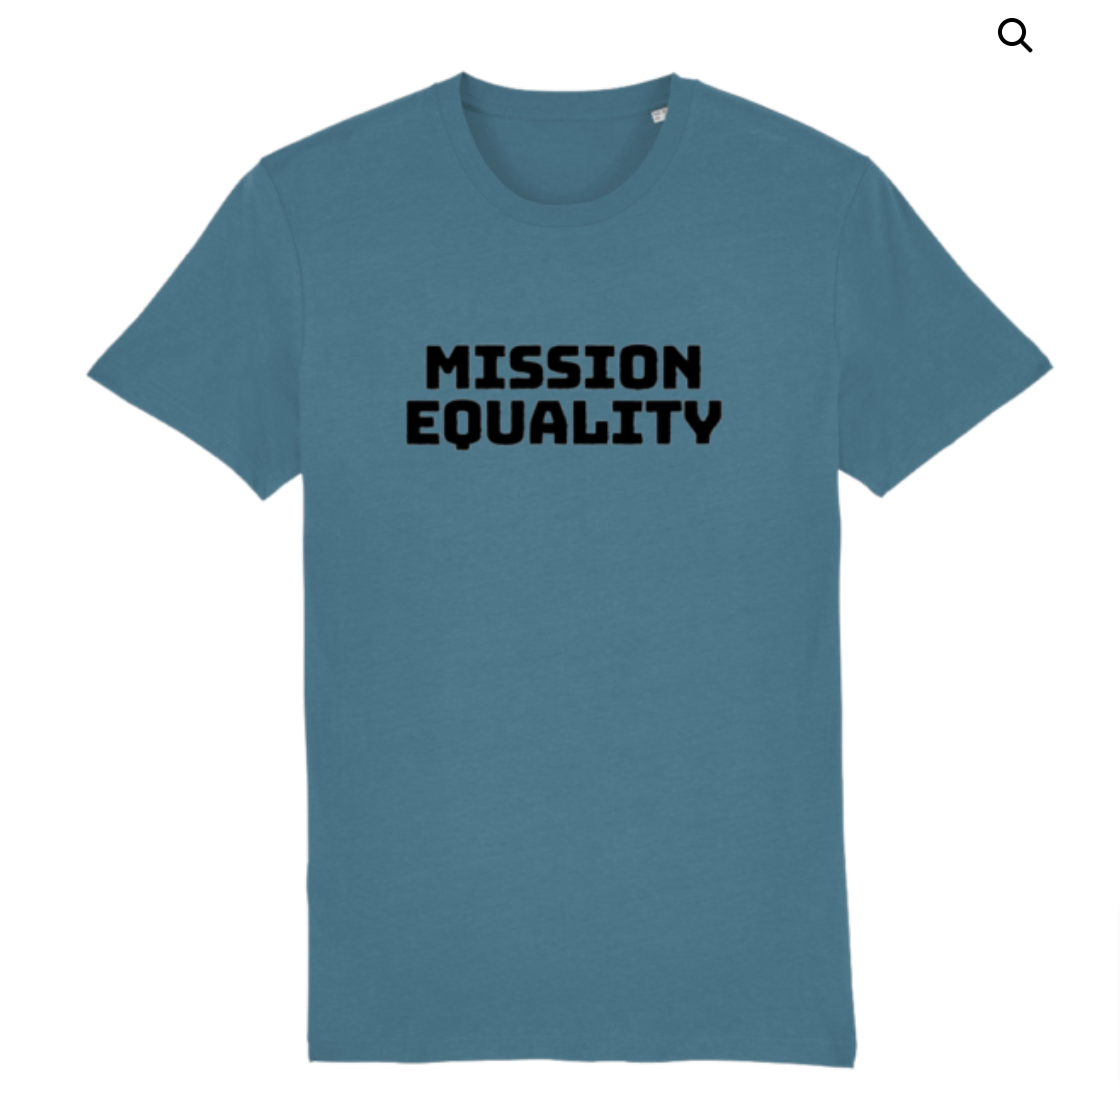 A duck egg blue t-shirt with black text that reads: Mission Equality